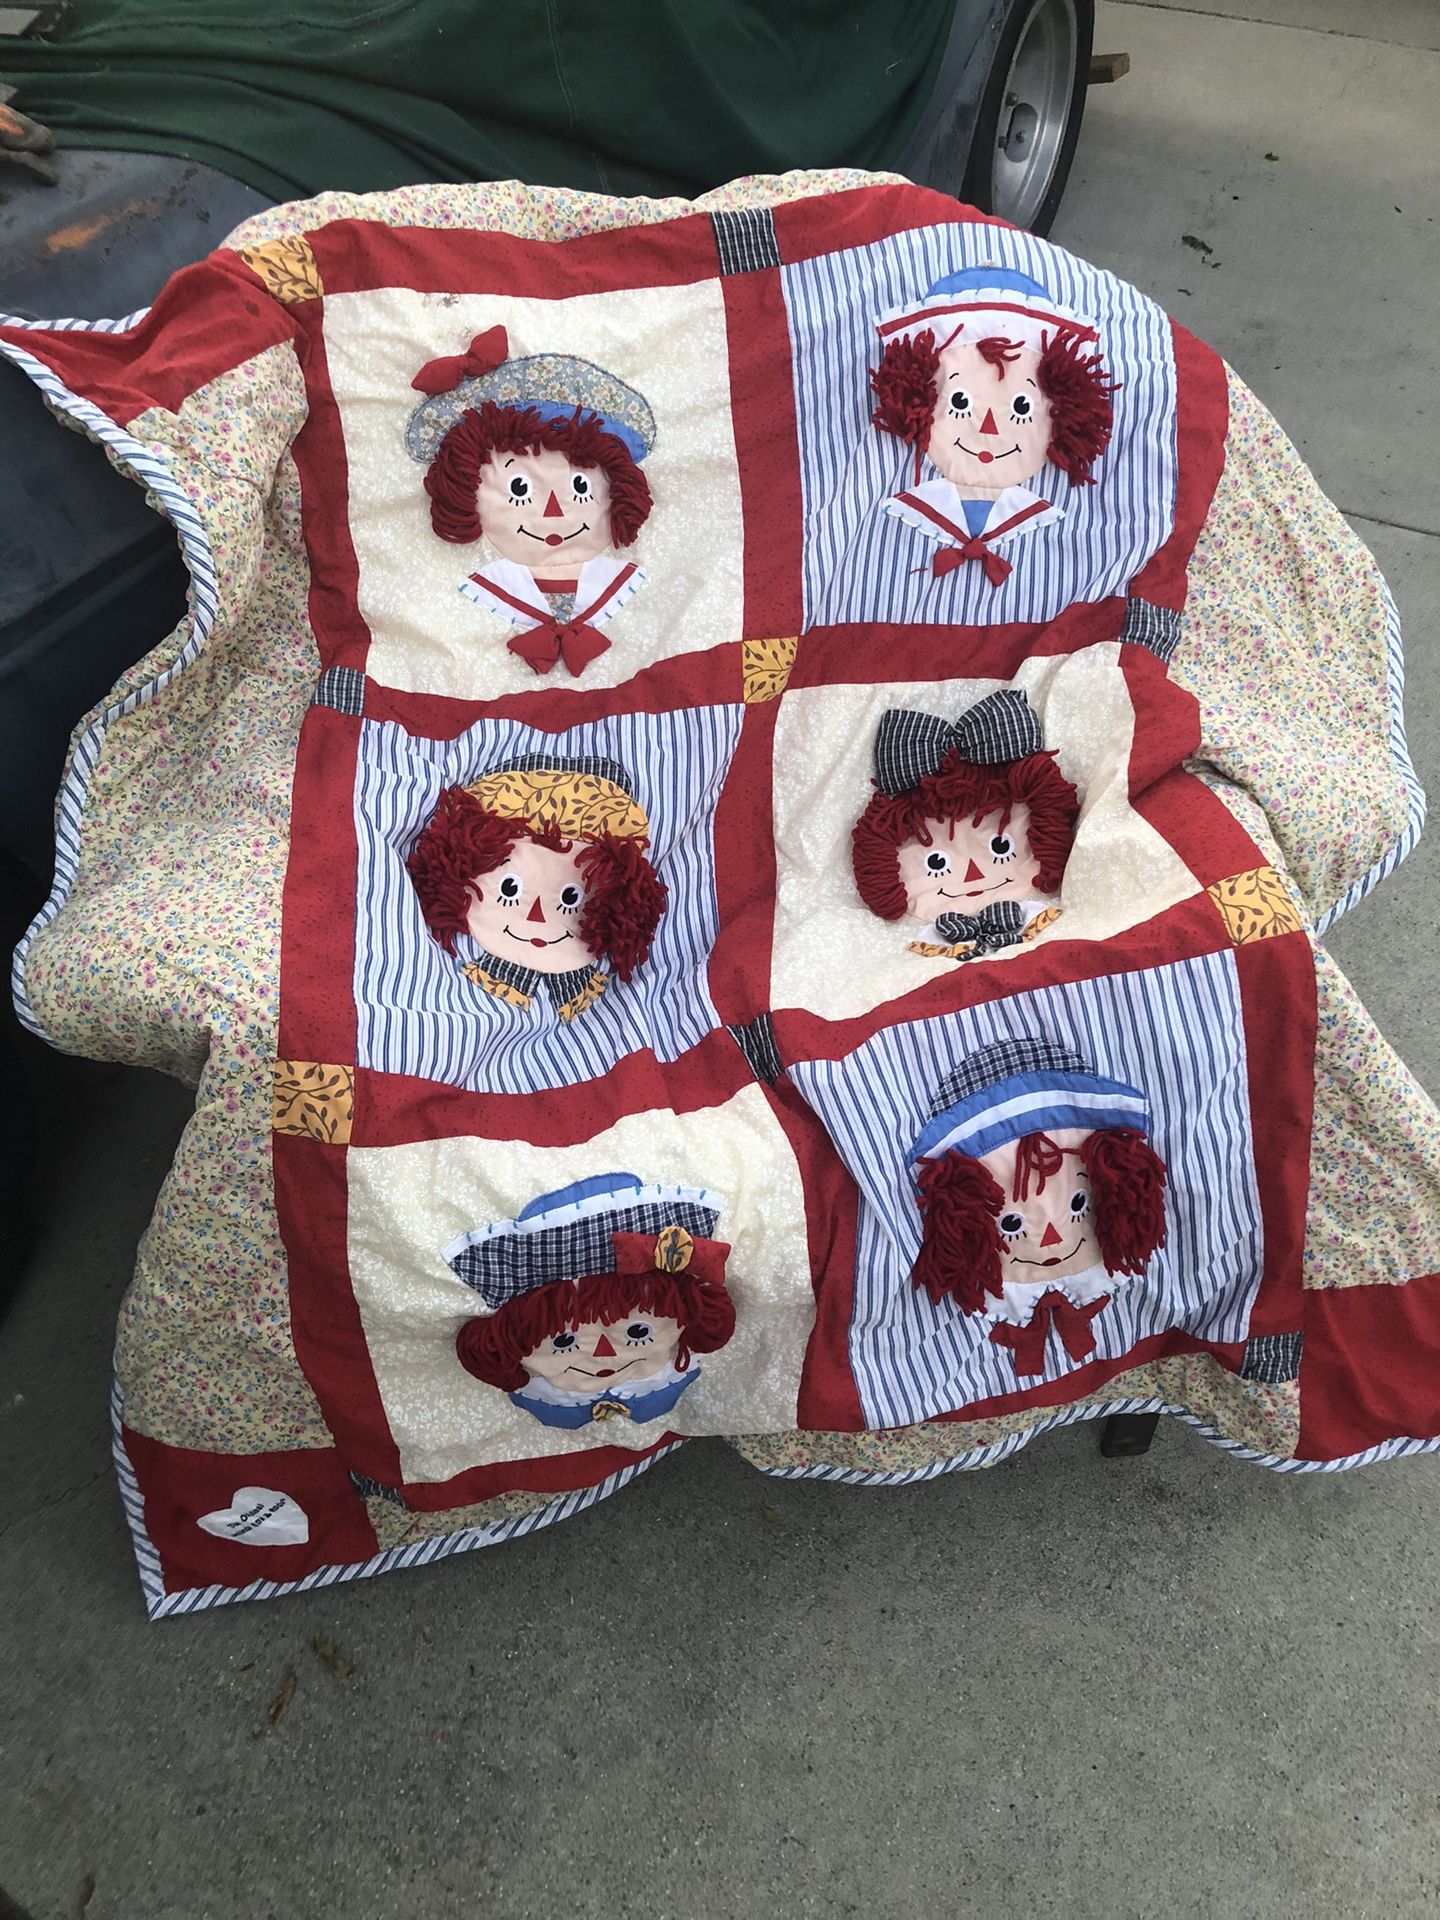 Raggedy Ann and Andy Quilted Kidd Blanket 